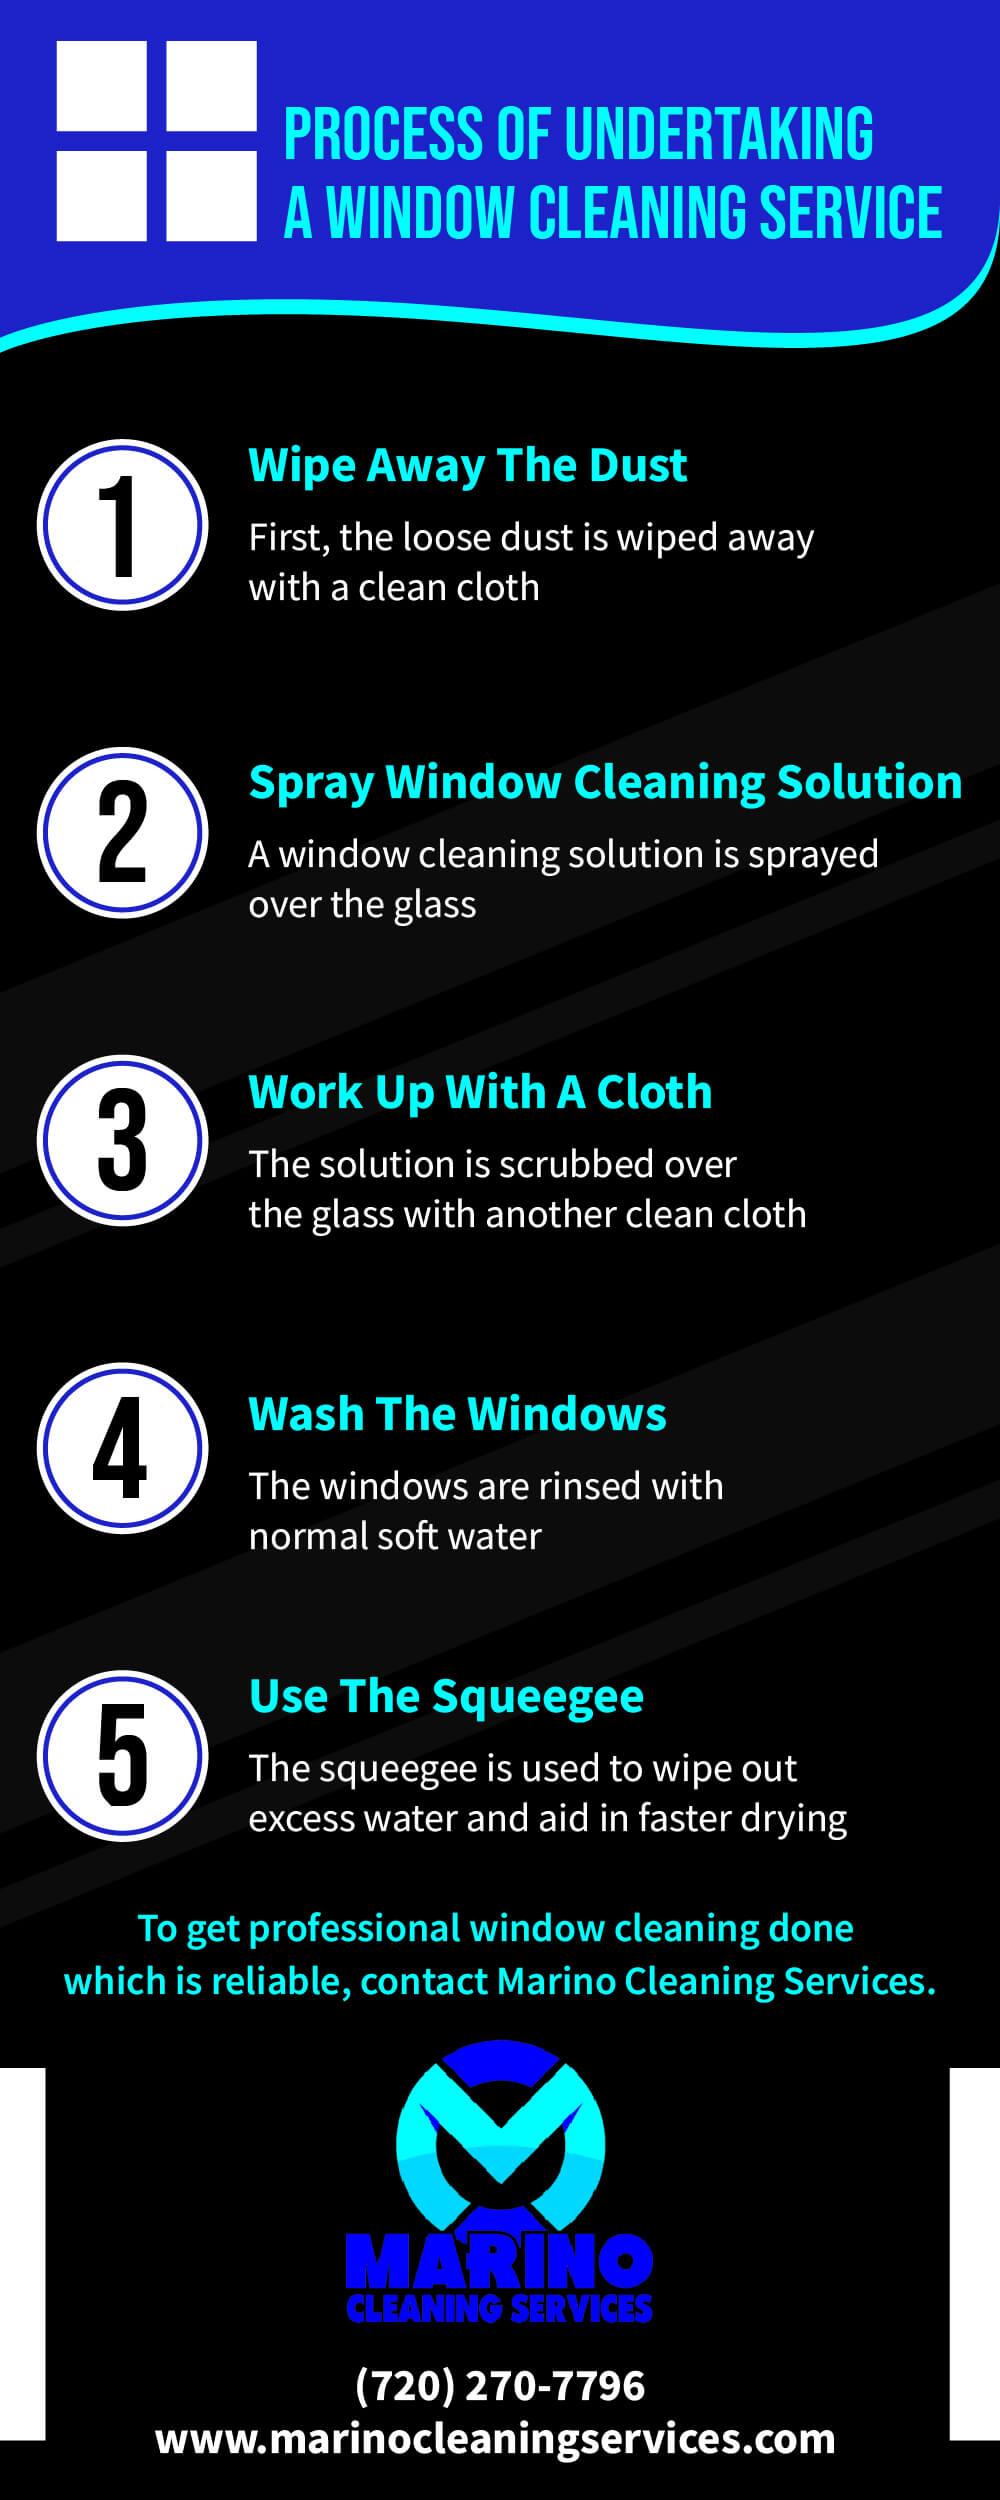 Process Of Undertaking A Window Cleaning Service